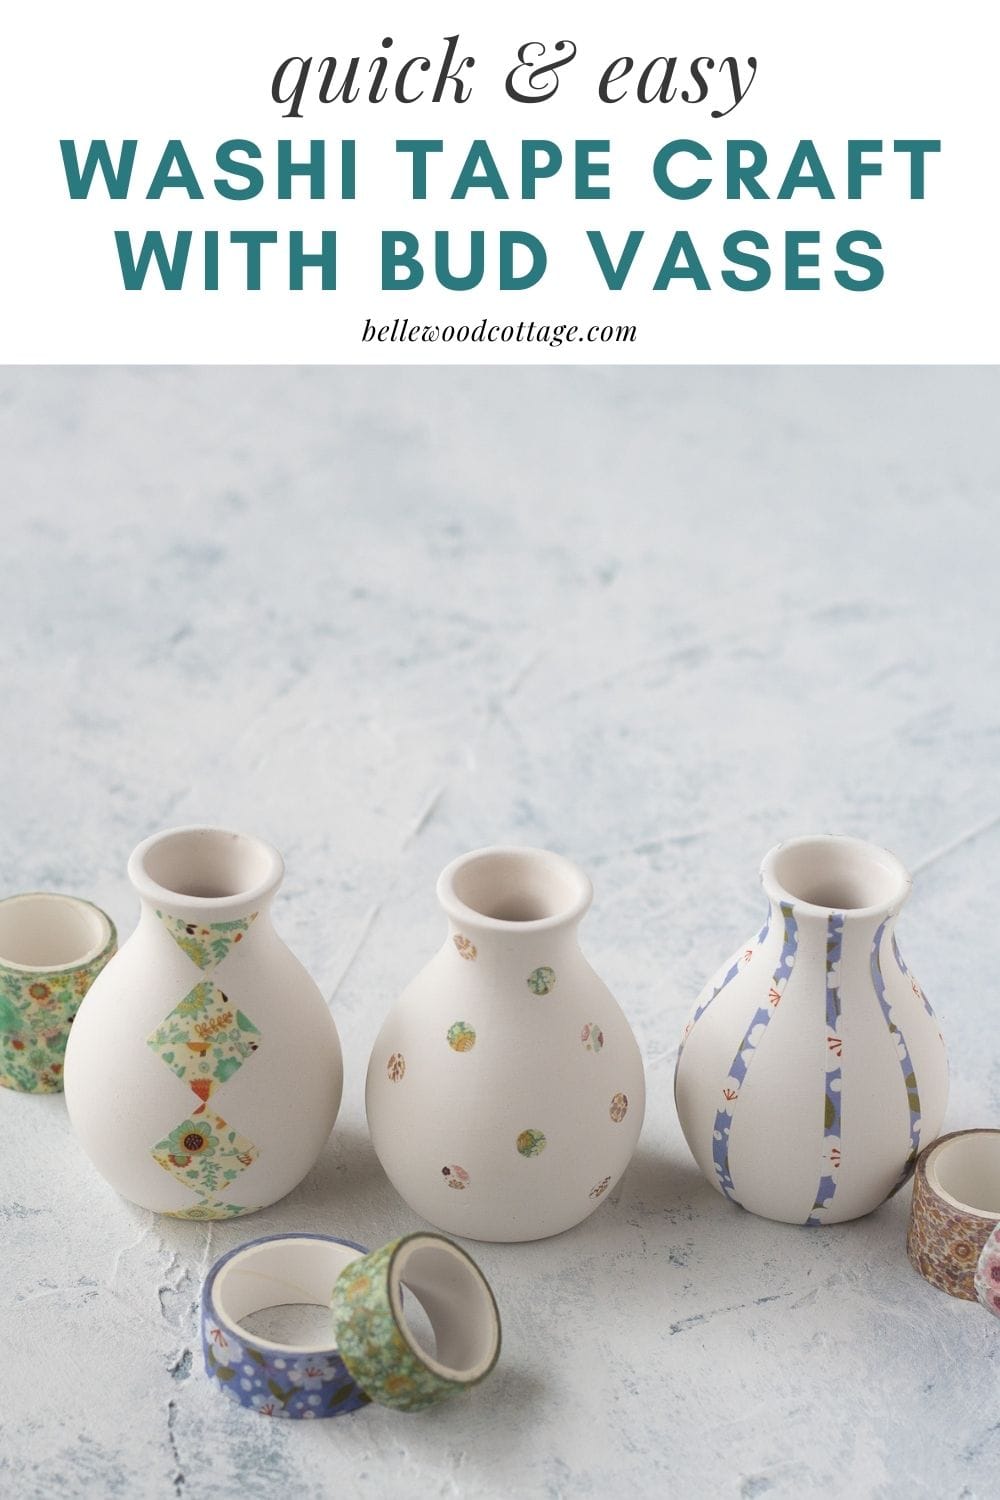 Decorated vases and spools of washi tape on a rustic surface.